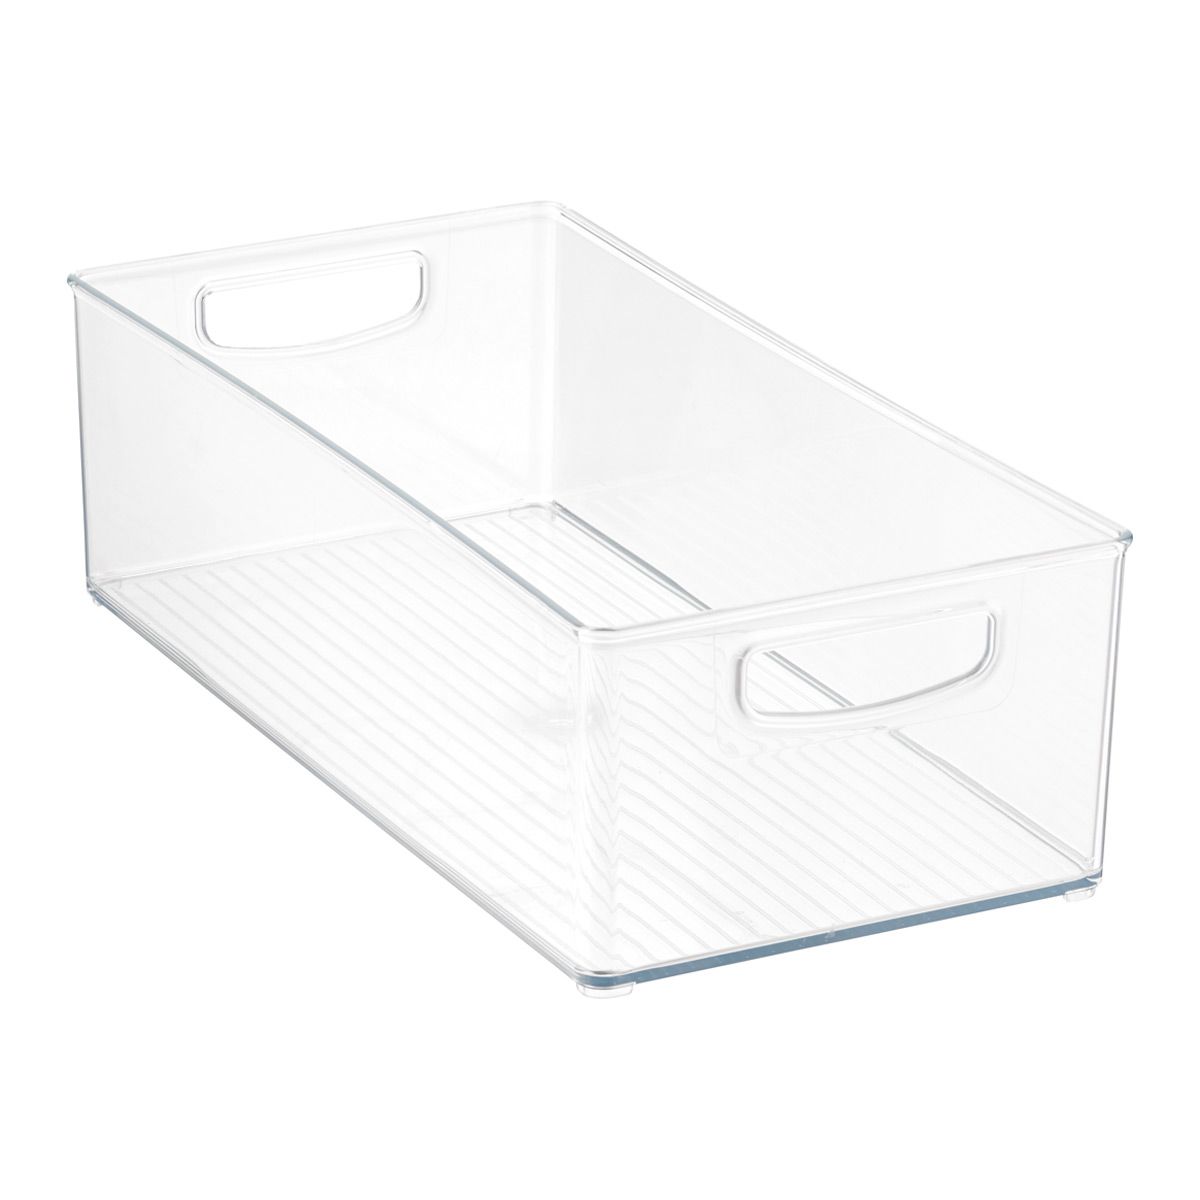 Linus^ Deep Drawer Bins | The Container Store